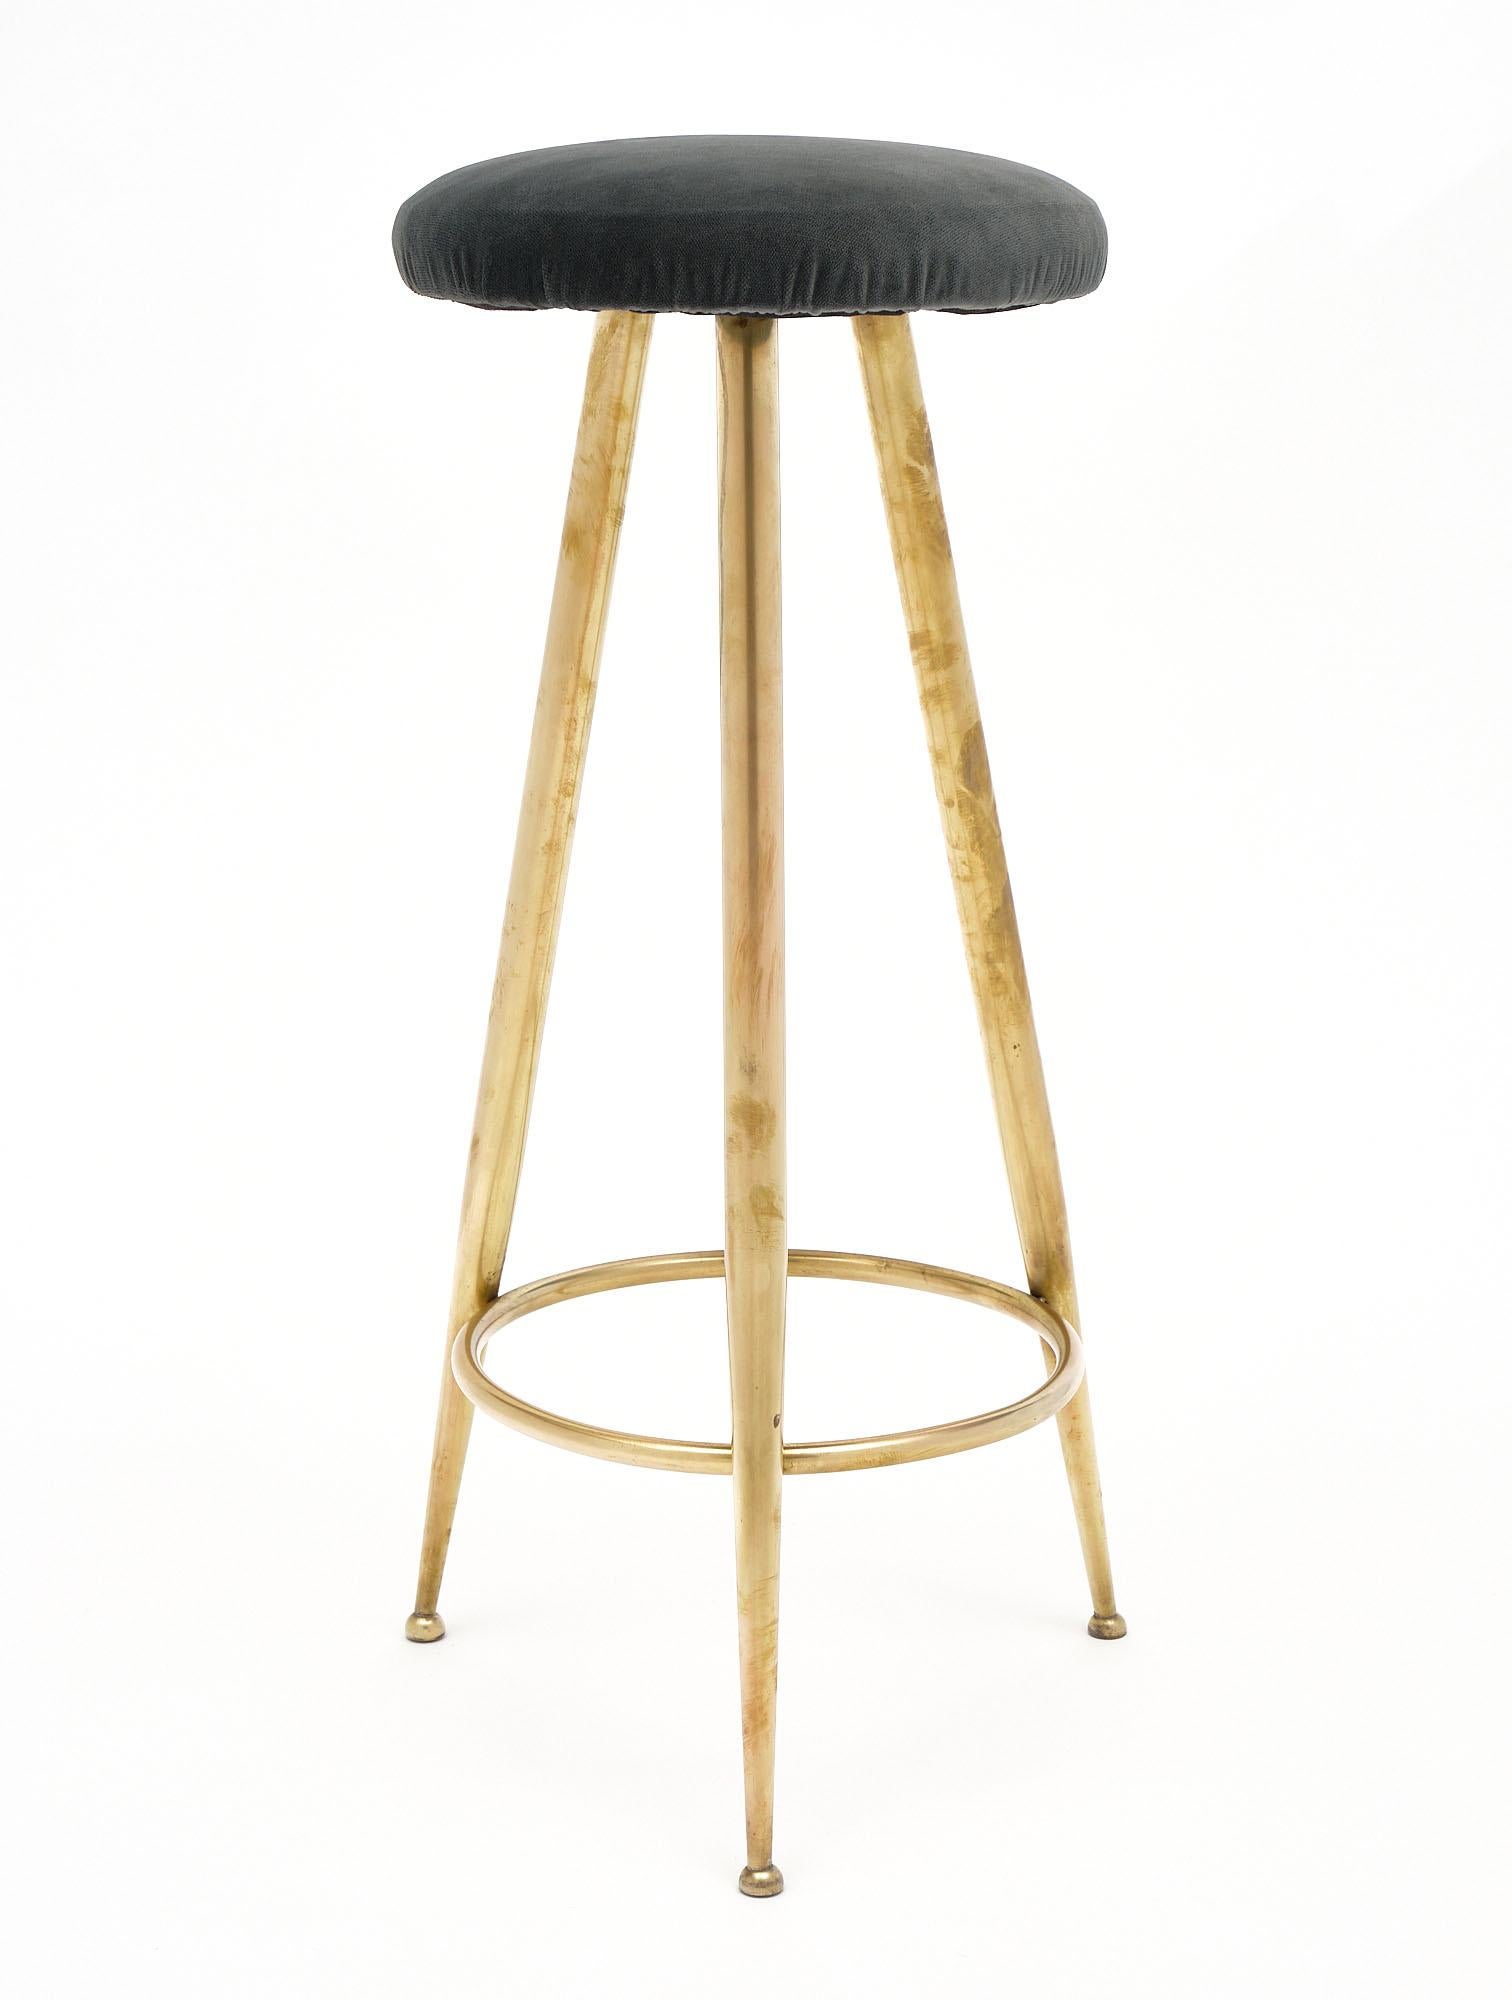 Italian tripod solid brass stool in the style of Gio Ponti. It has been newly upholstered in a gray velvet blend.